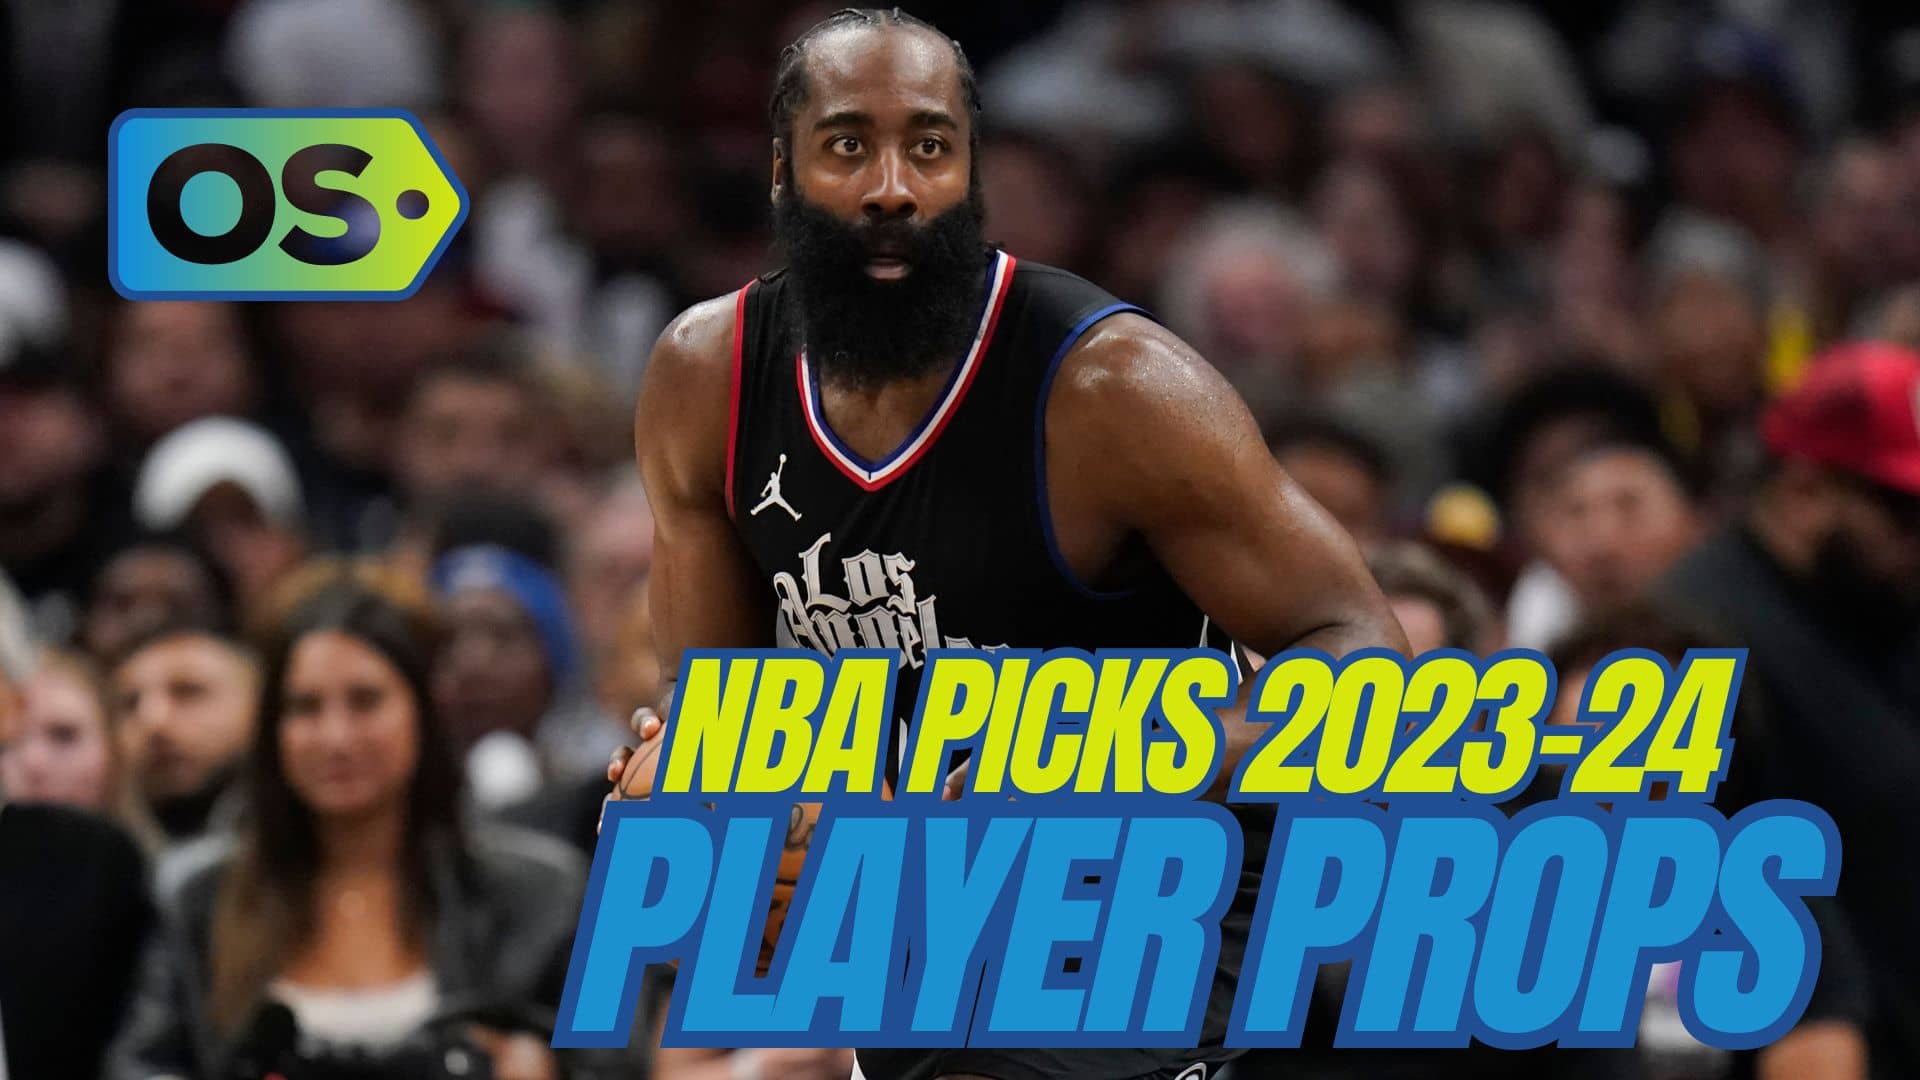 The best NBA player prop bets and picks today for Friday, February 23, include wagers on James Harden and Tyrese Maxey.